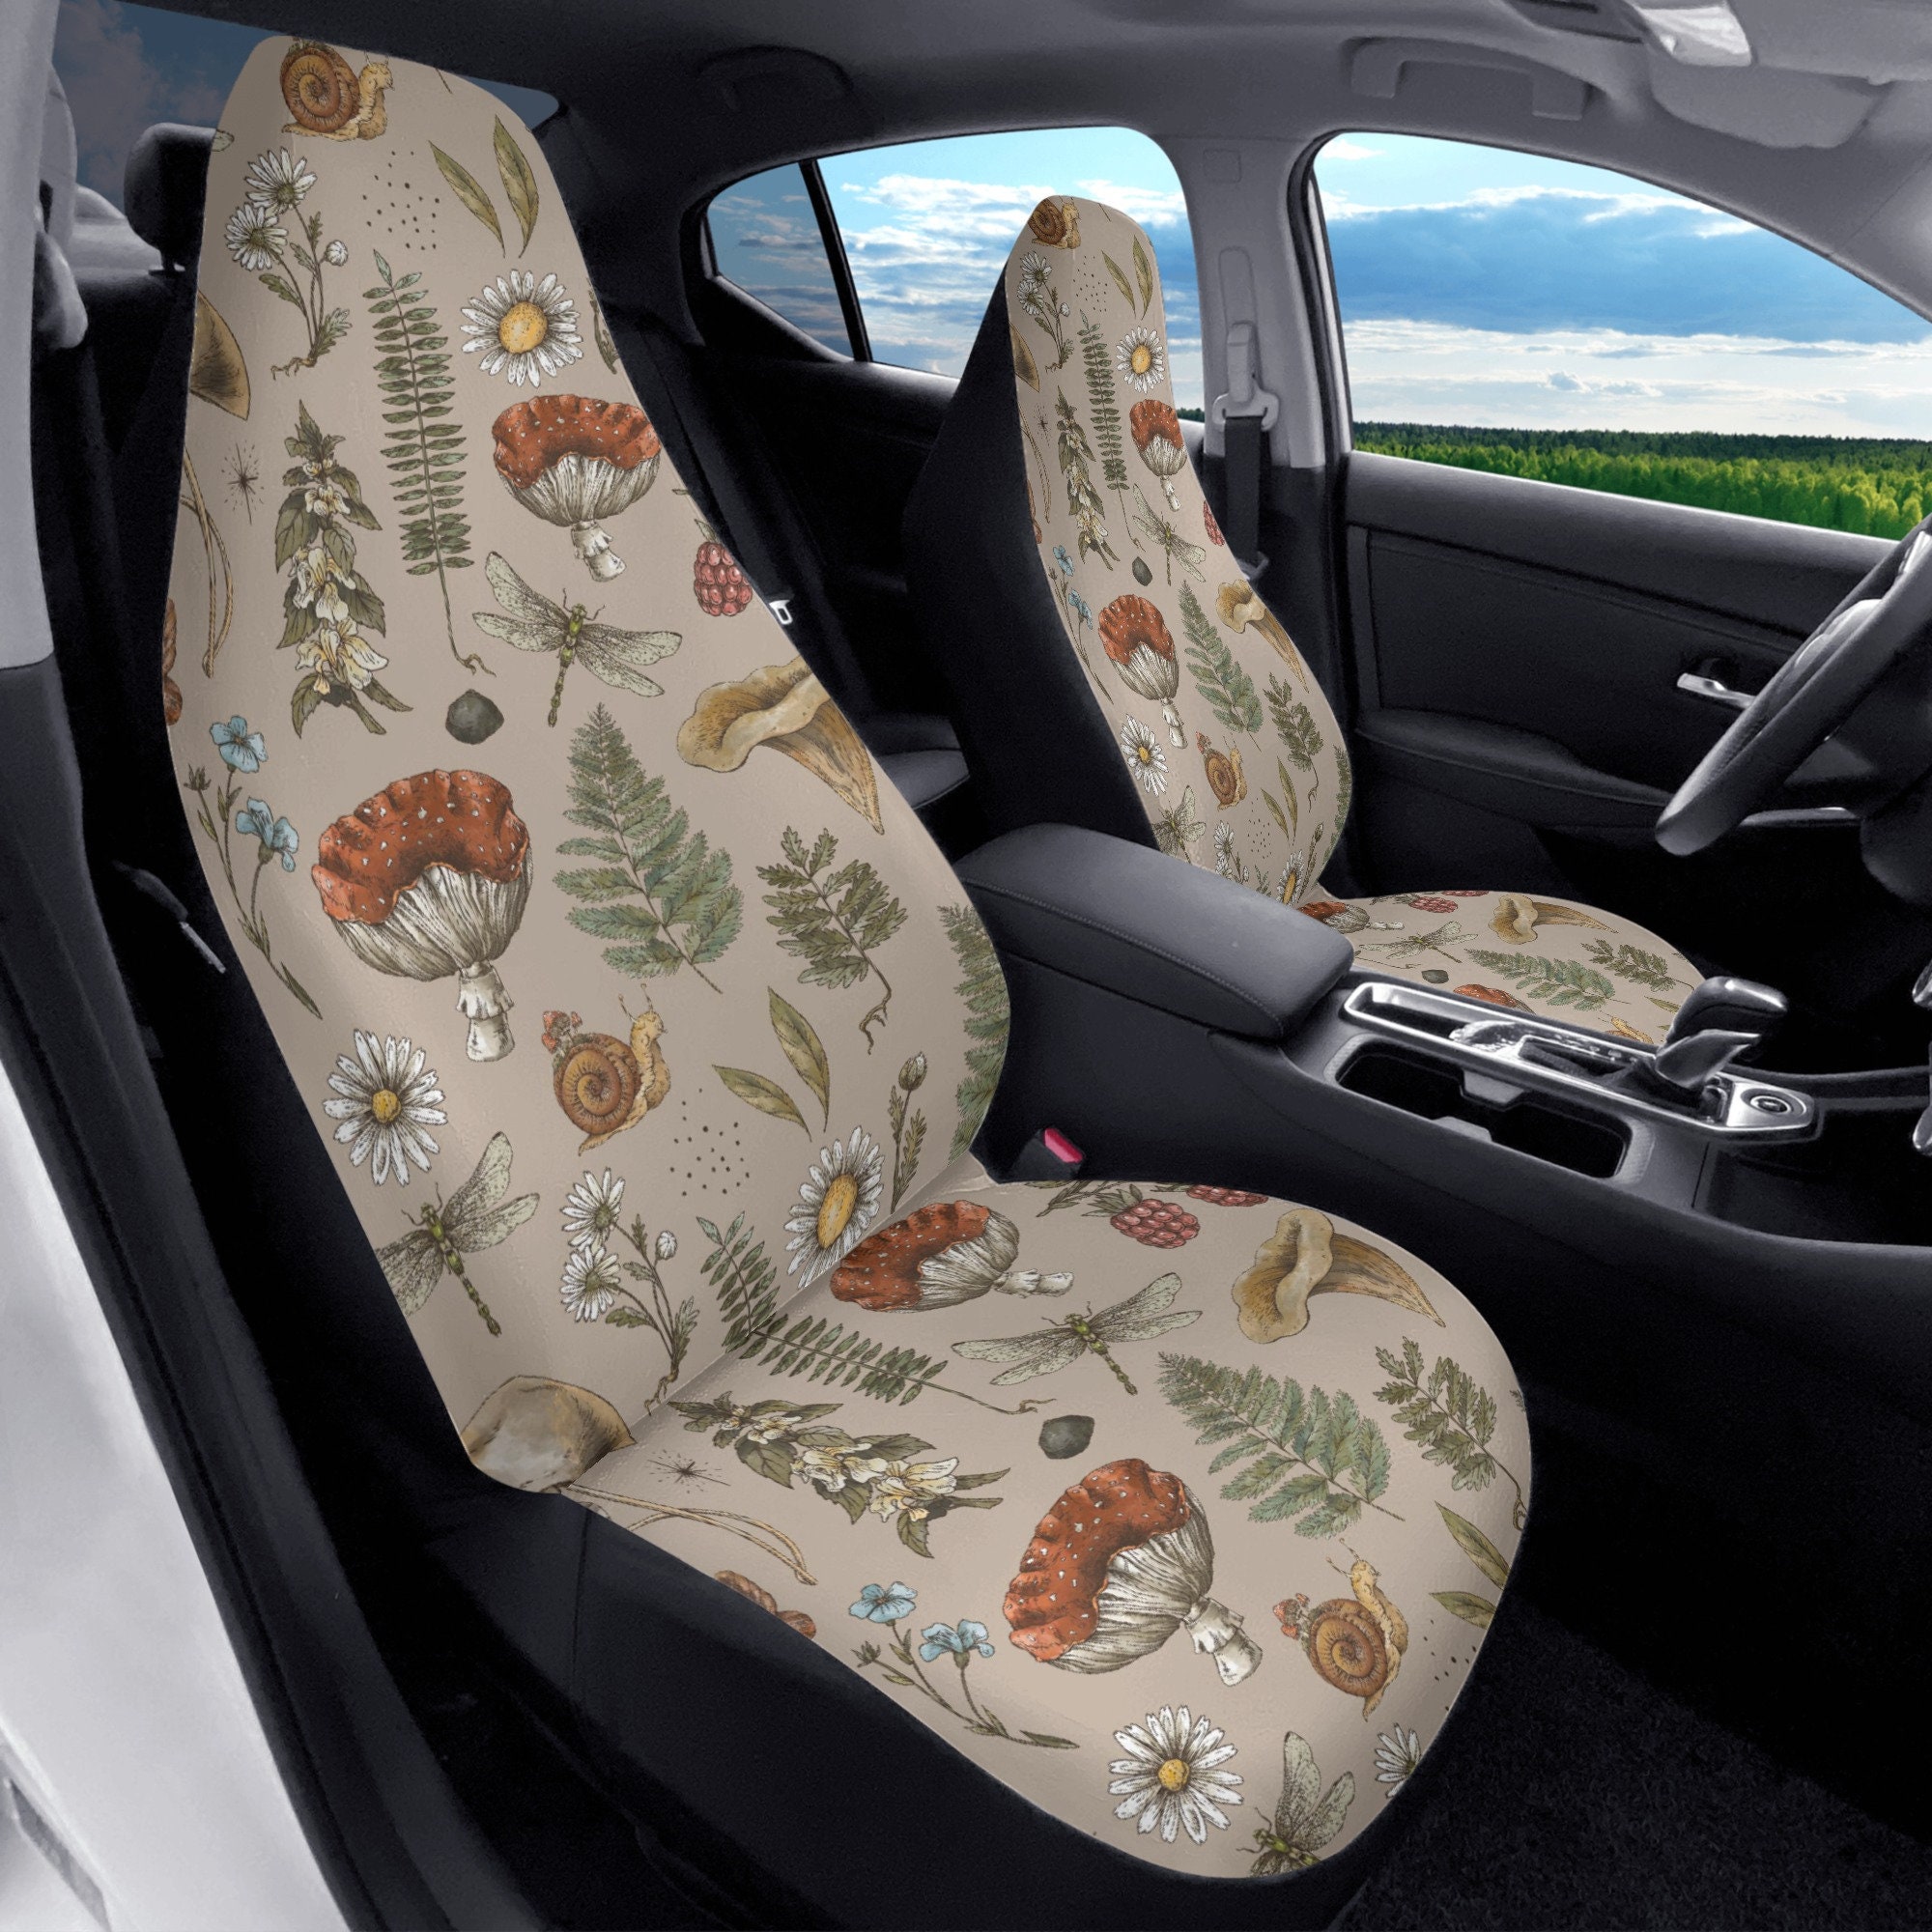 Discover Cottagecore Mushroom Car Seat Cover, Seat Covers for Car for Women, Beige Car Seat Covers for Vehicle, Aesthetic Car Gift